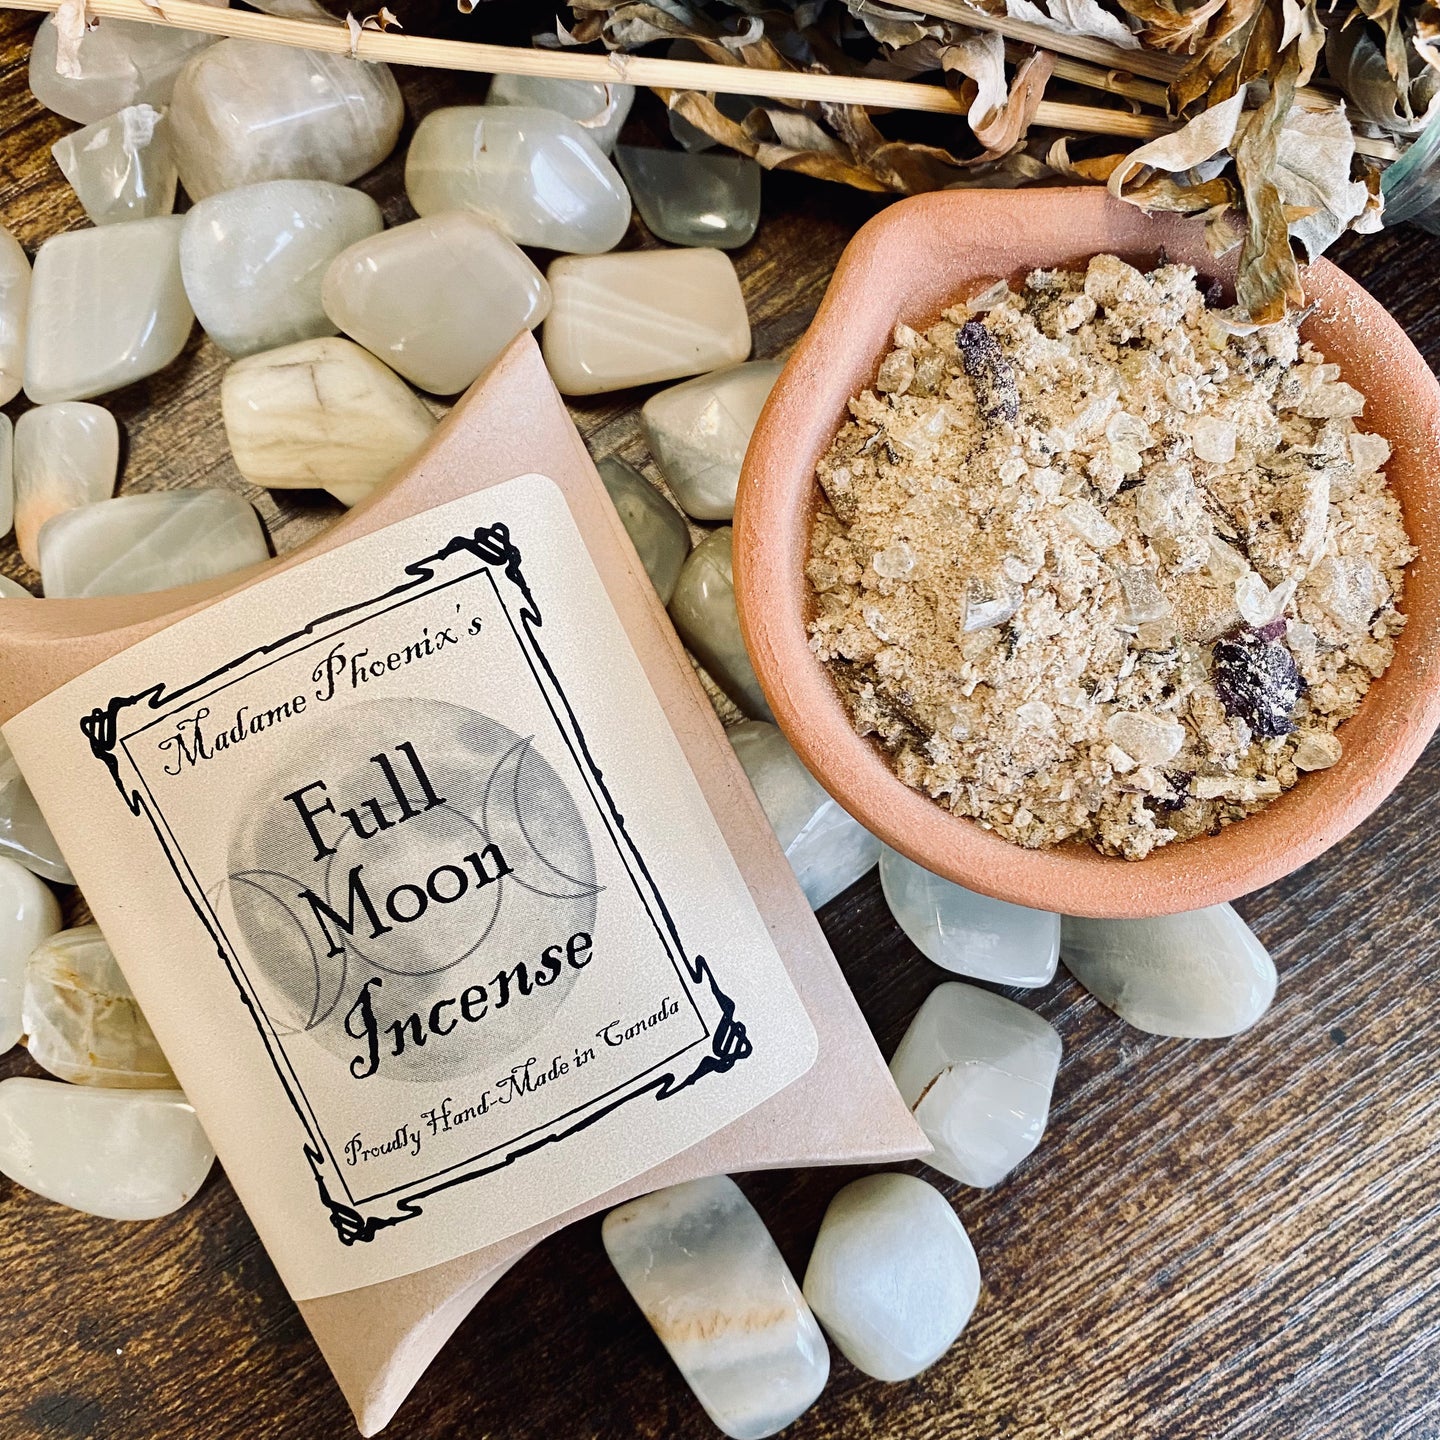 Full Moon Incense: 9 fold blend of all natural and organic herbs, resins and oils